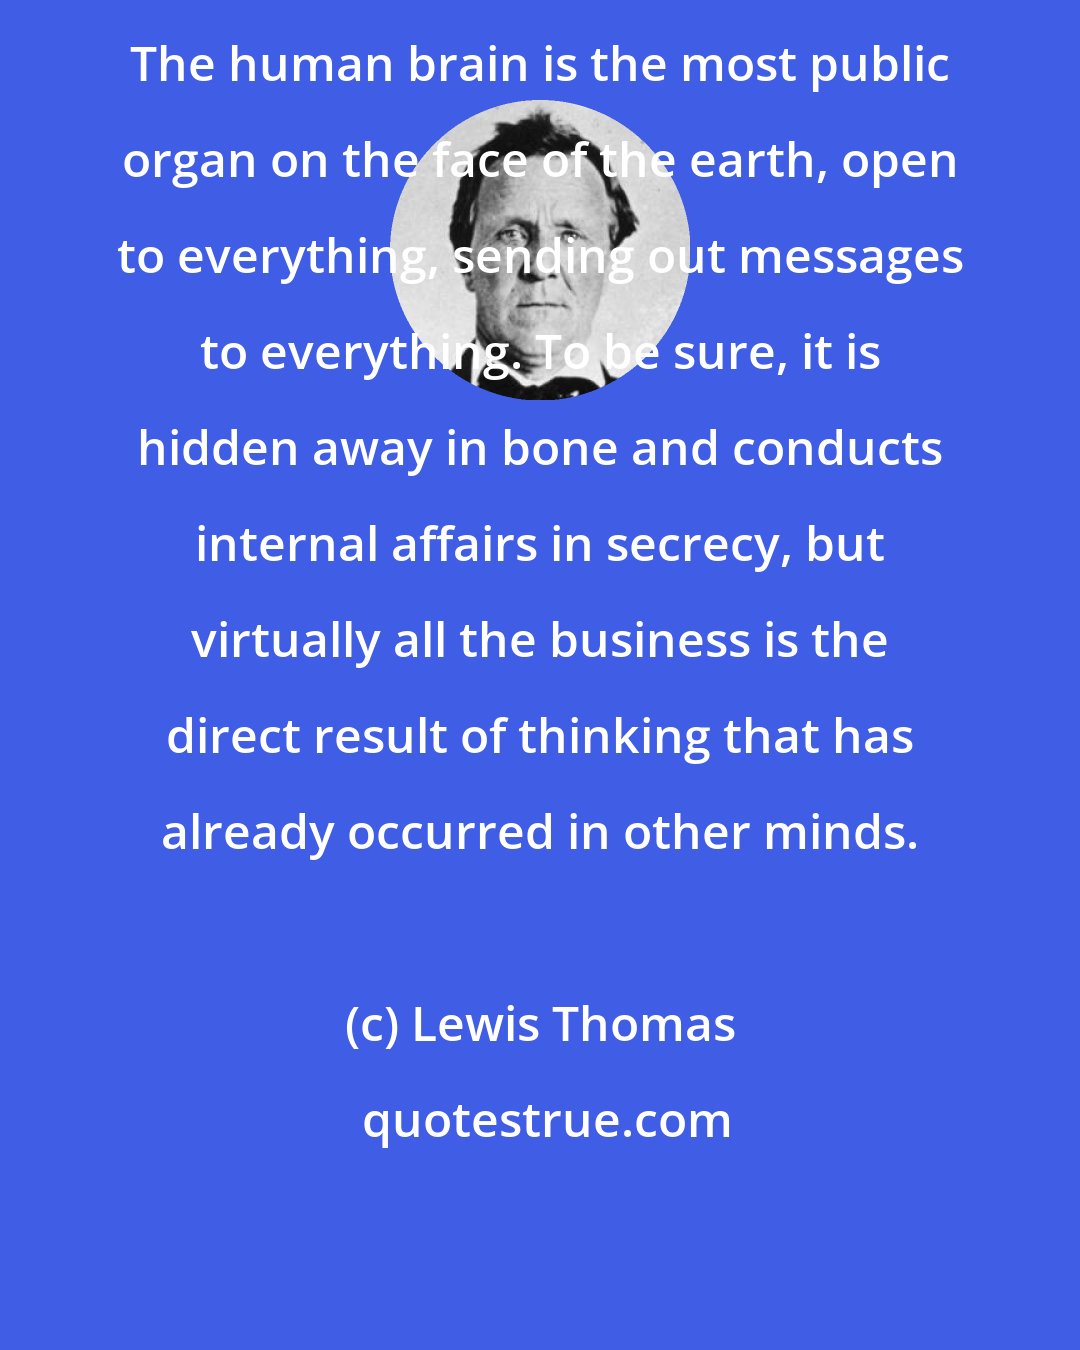 Lewis Thomas: The human brain is the most public organ on the face of the earth, open to everything, sending out messages to everything. To be sure, it is hidden away in bone and conducts internal affairs in secrecy, but virtually all the business is the direct result of thinking that has already occurred in other minds.